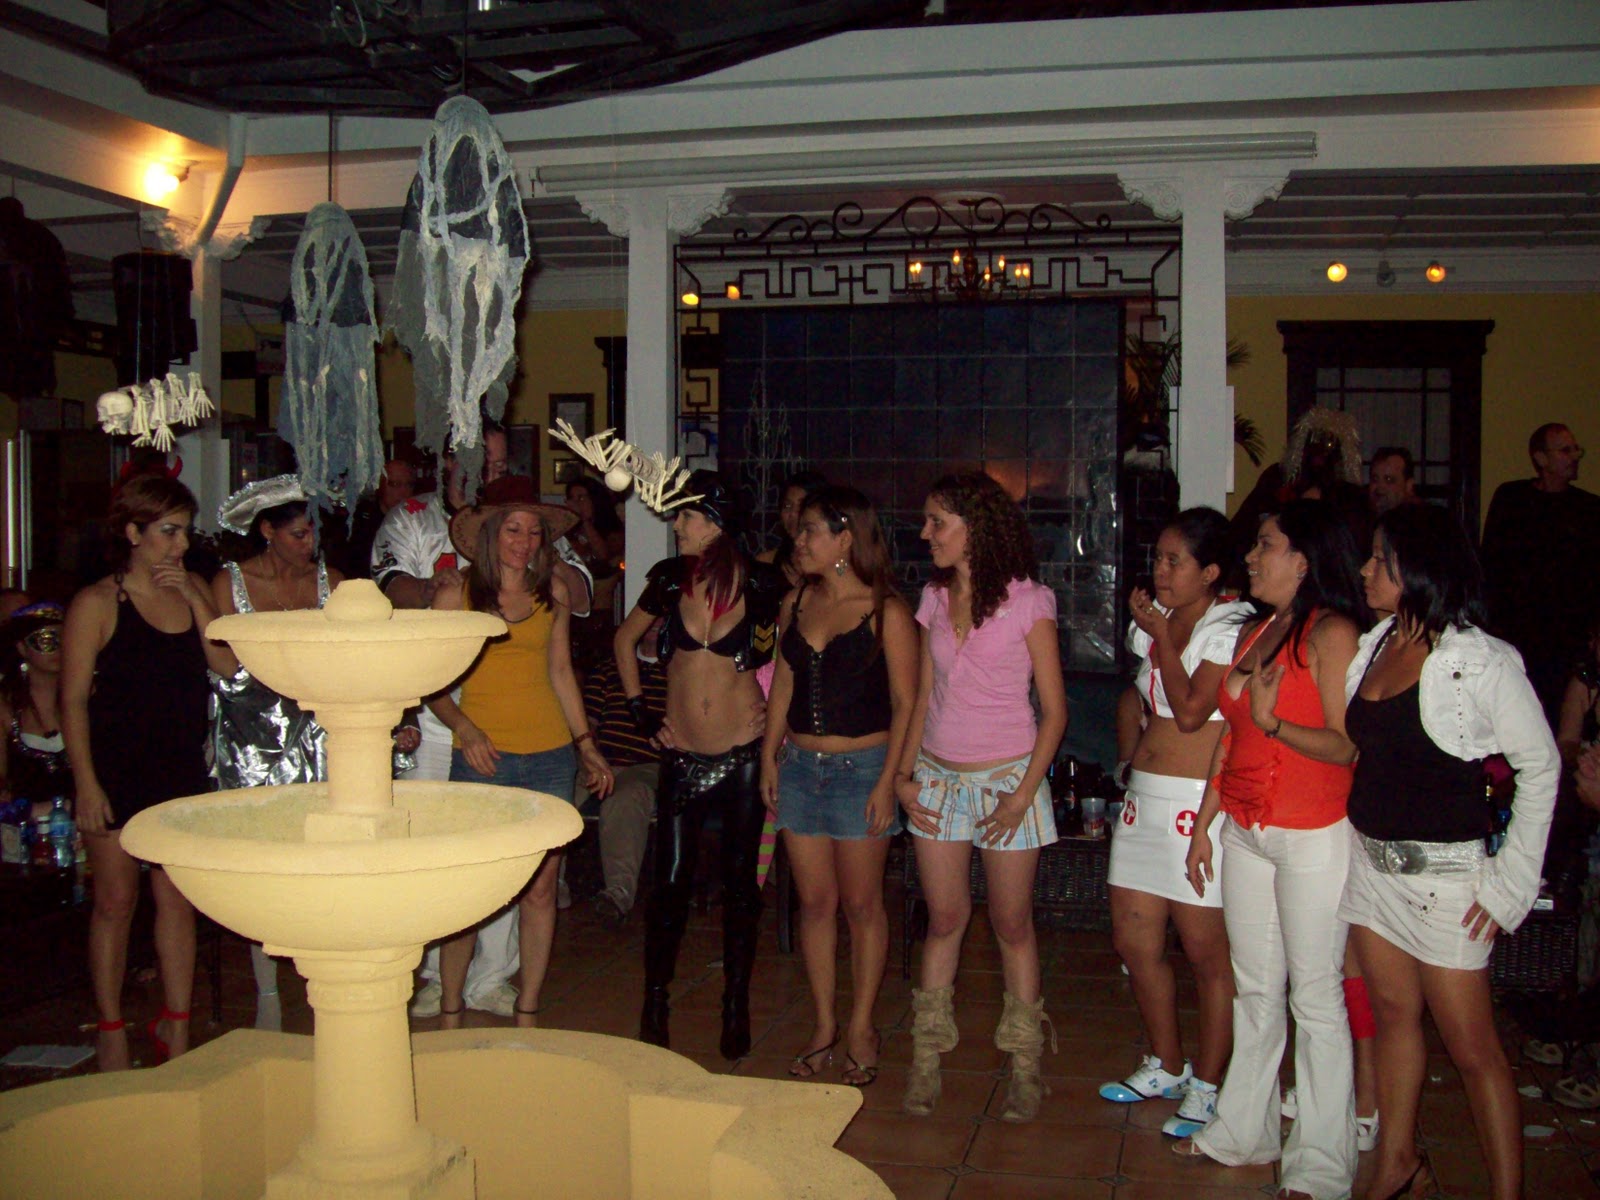 Jetblasts travels: Costa Rican Halloween2008 at the 